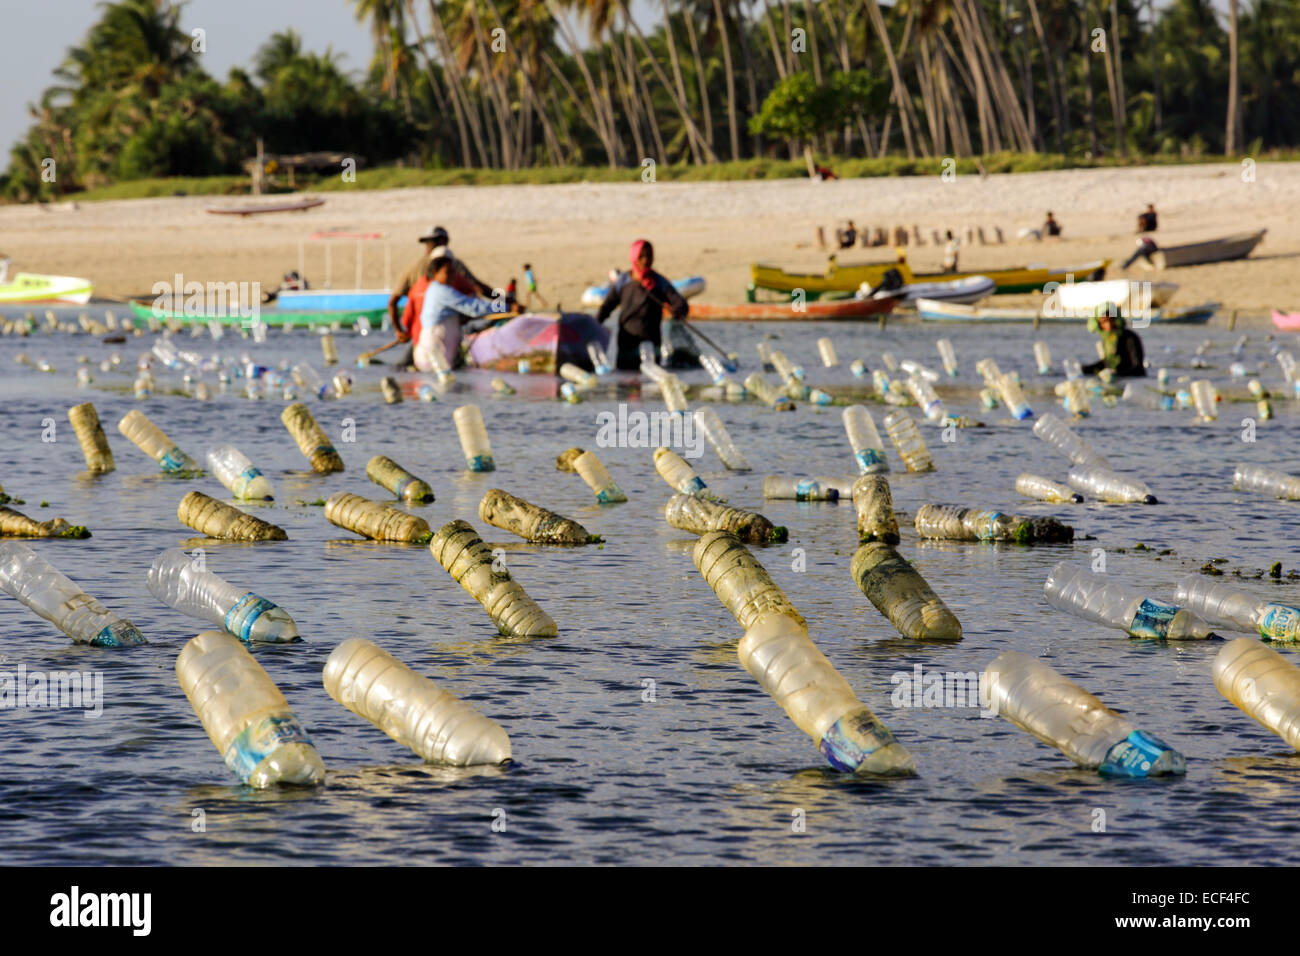 Seaweed farming in Indonesia using empty plastic bottles to float the lines that the seaweed grows on Stock Photo